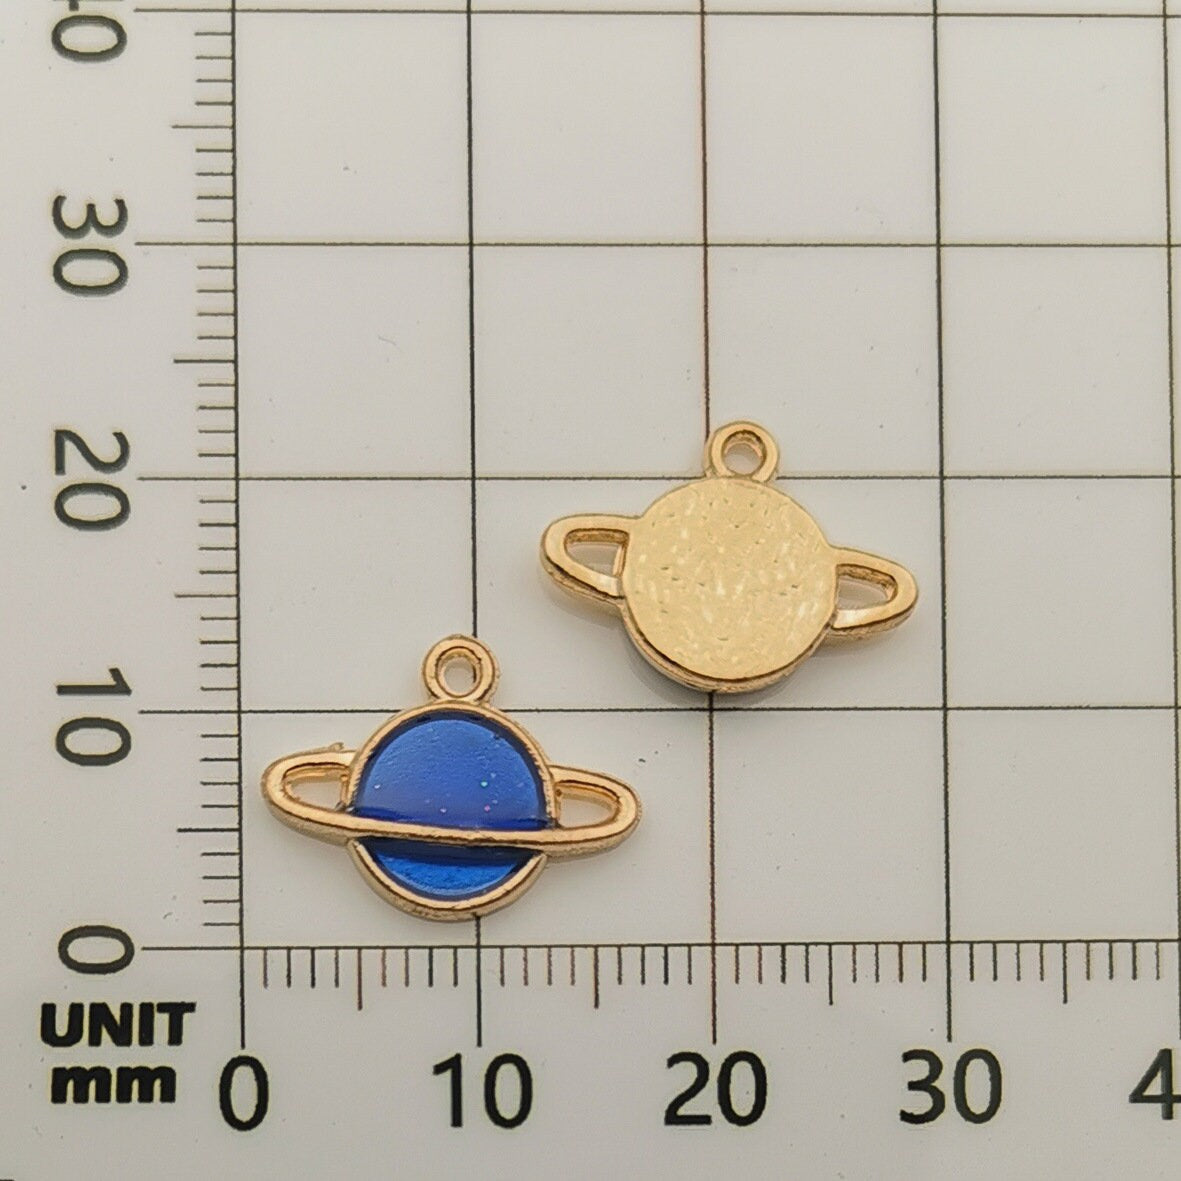 8 celestial assorted enamel charms, Nickel free metal pendants, Cute mixed shapes for jewelry making